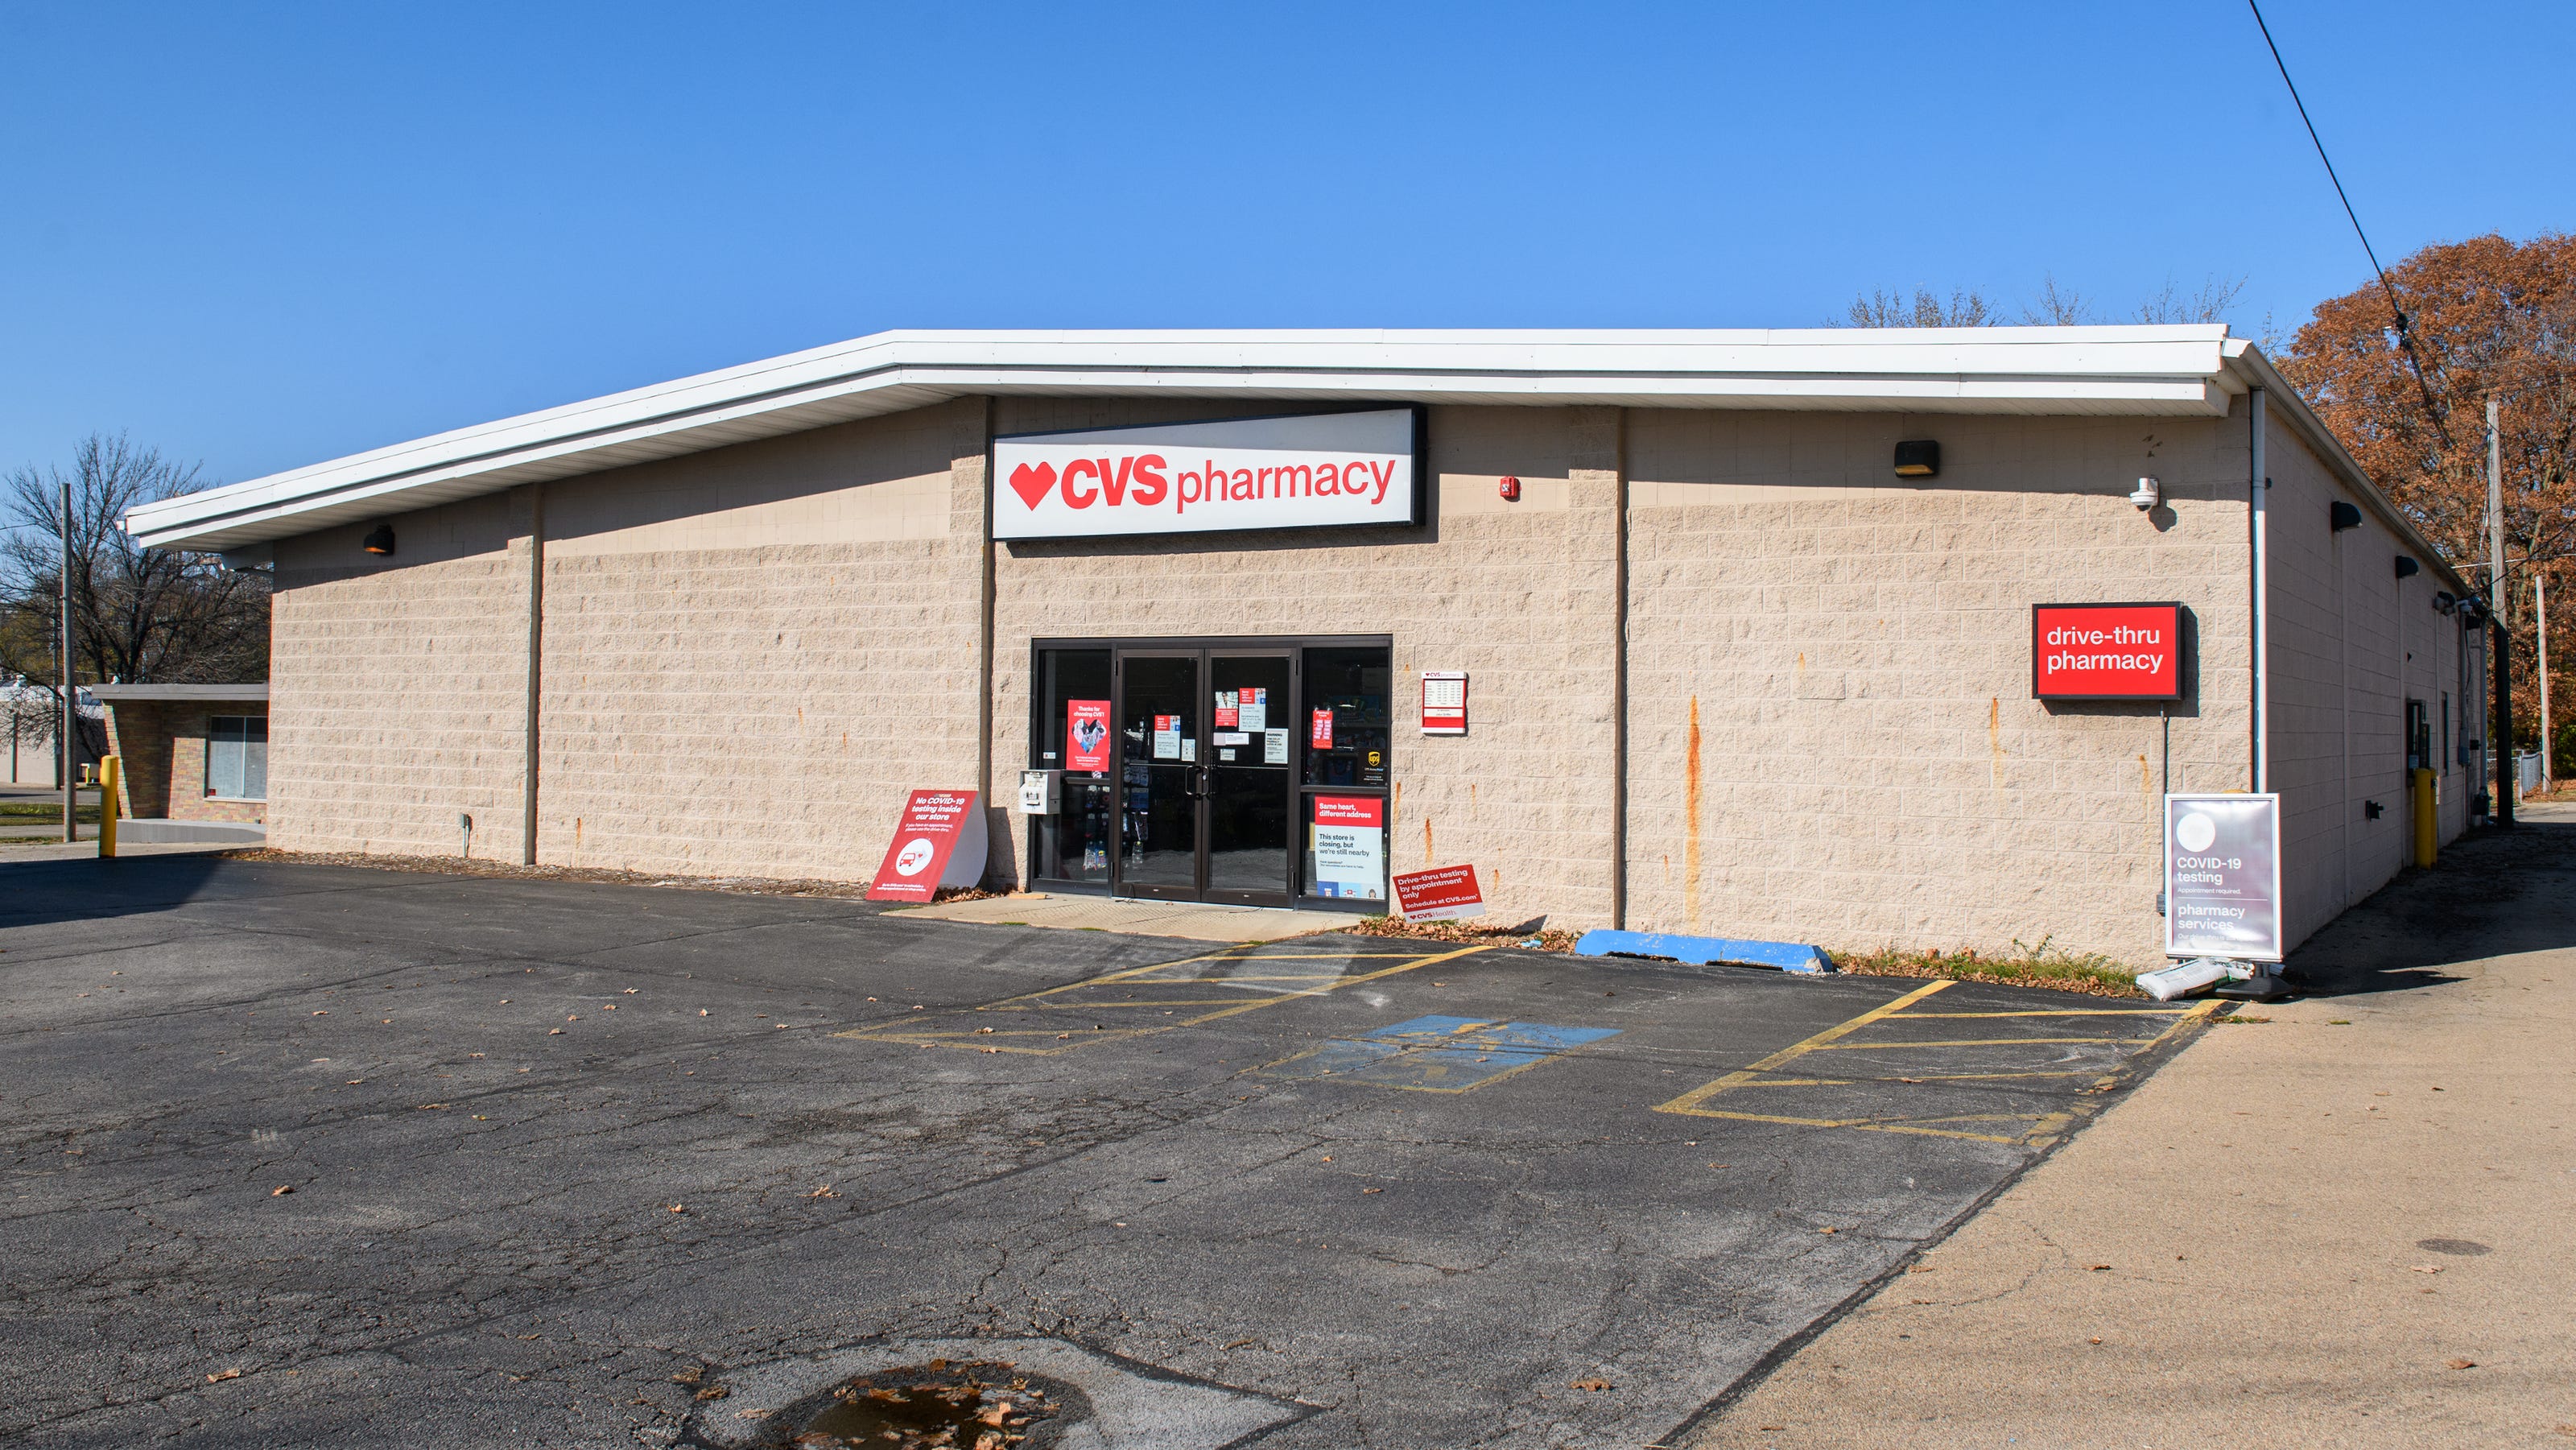  Lacon, Illinois loses its only pharmacy in CVS. Here's what it means for residents 